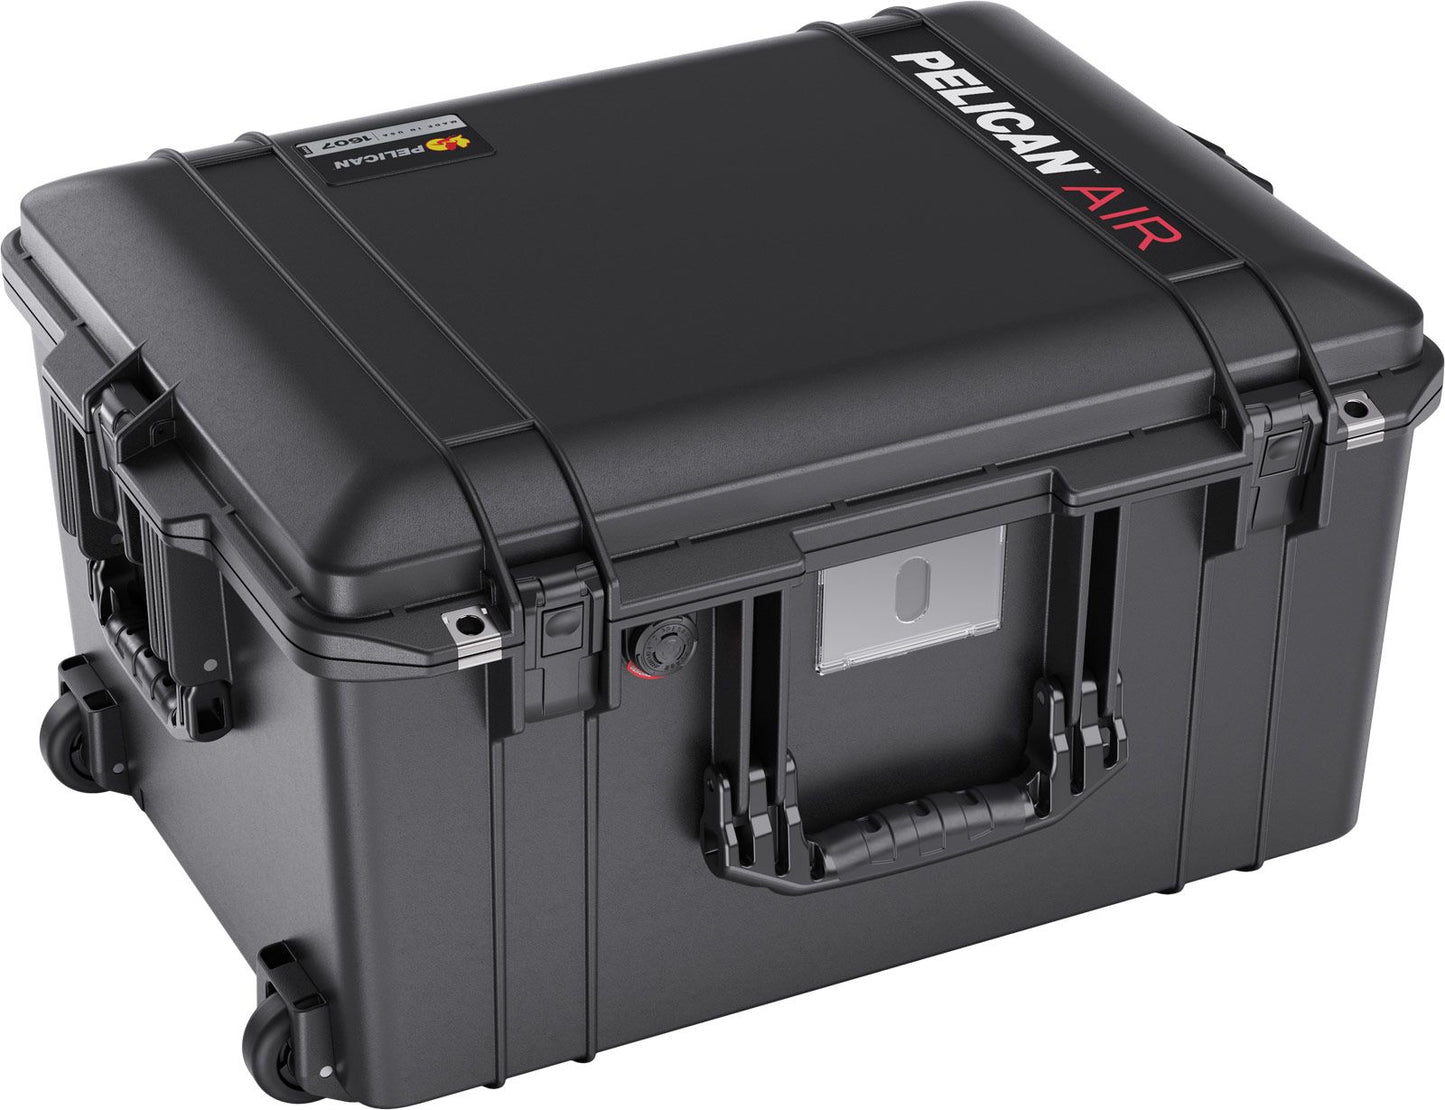 Pelican 1607 Air Case With Divider - Limited Lifetime Local Warranty